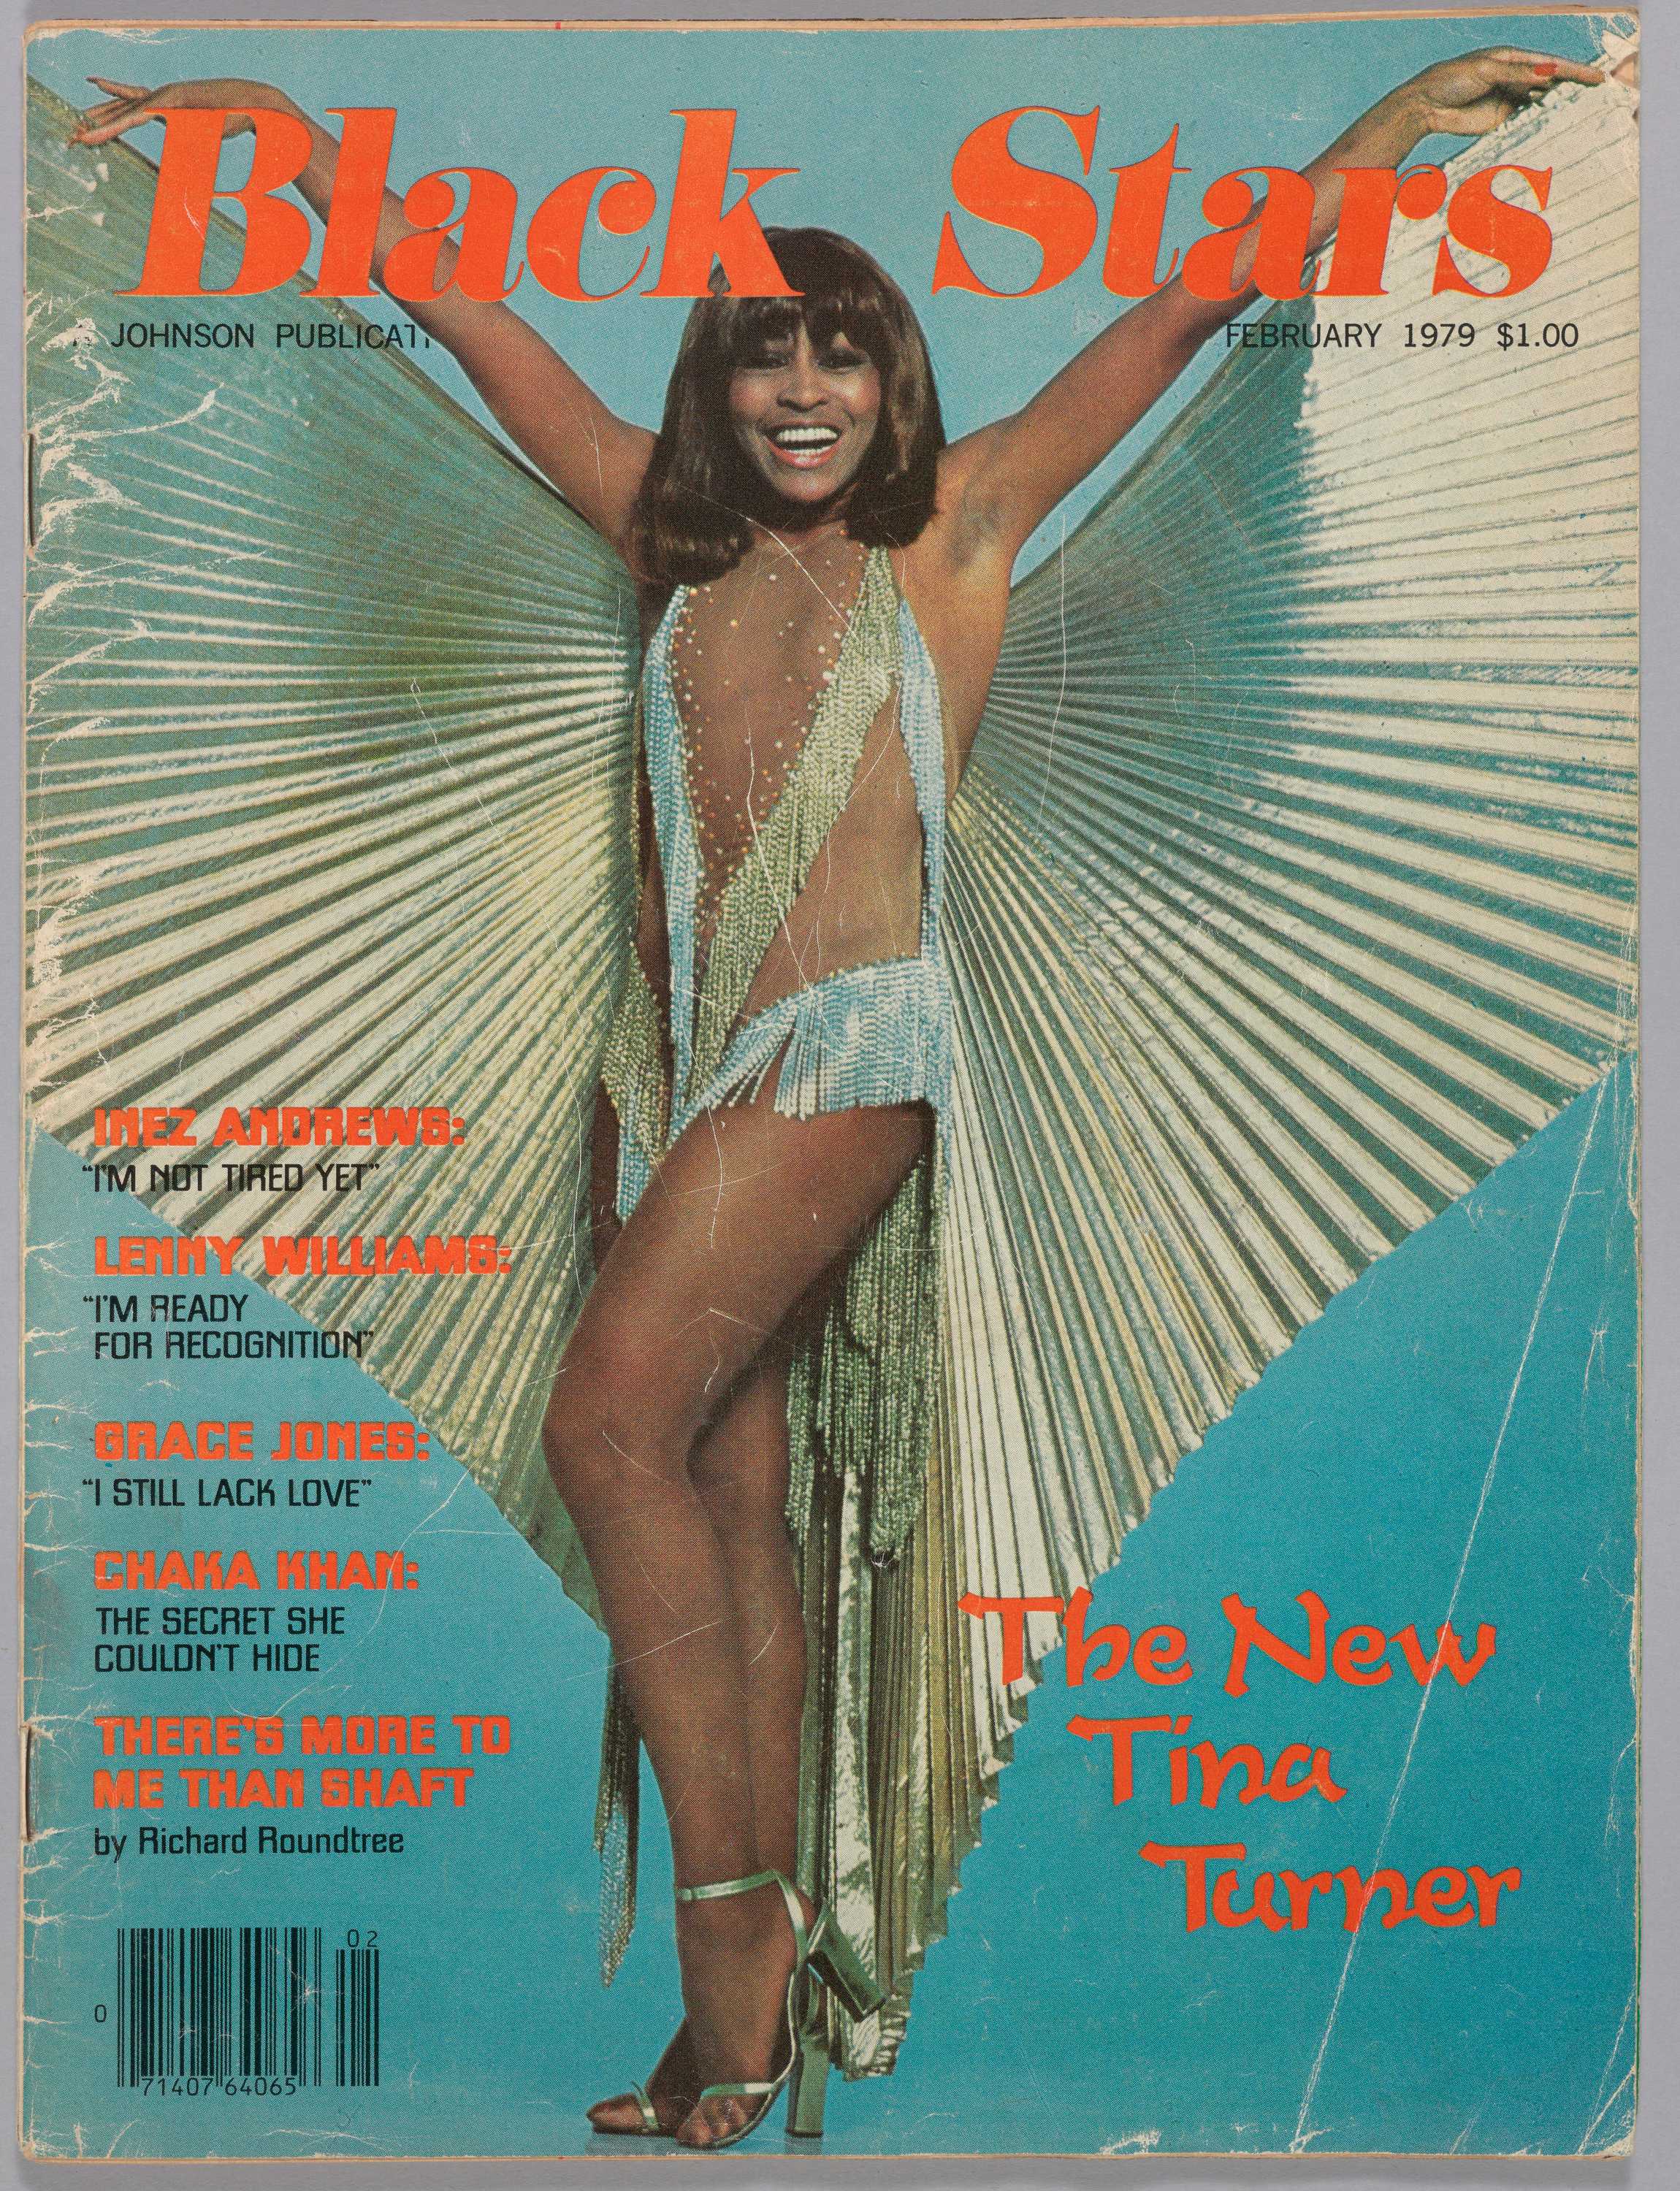 A Black Stars magazine, Volume 28, Number 4 that features a color photograph of the singer Tina Turner on the cover.